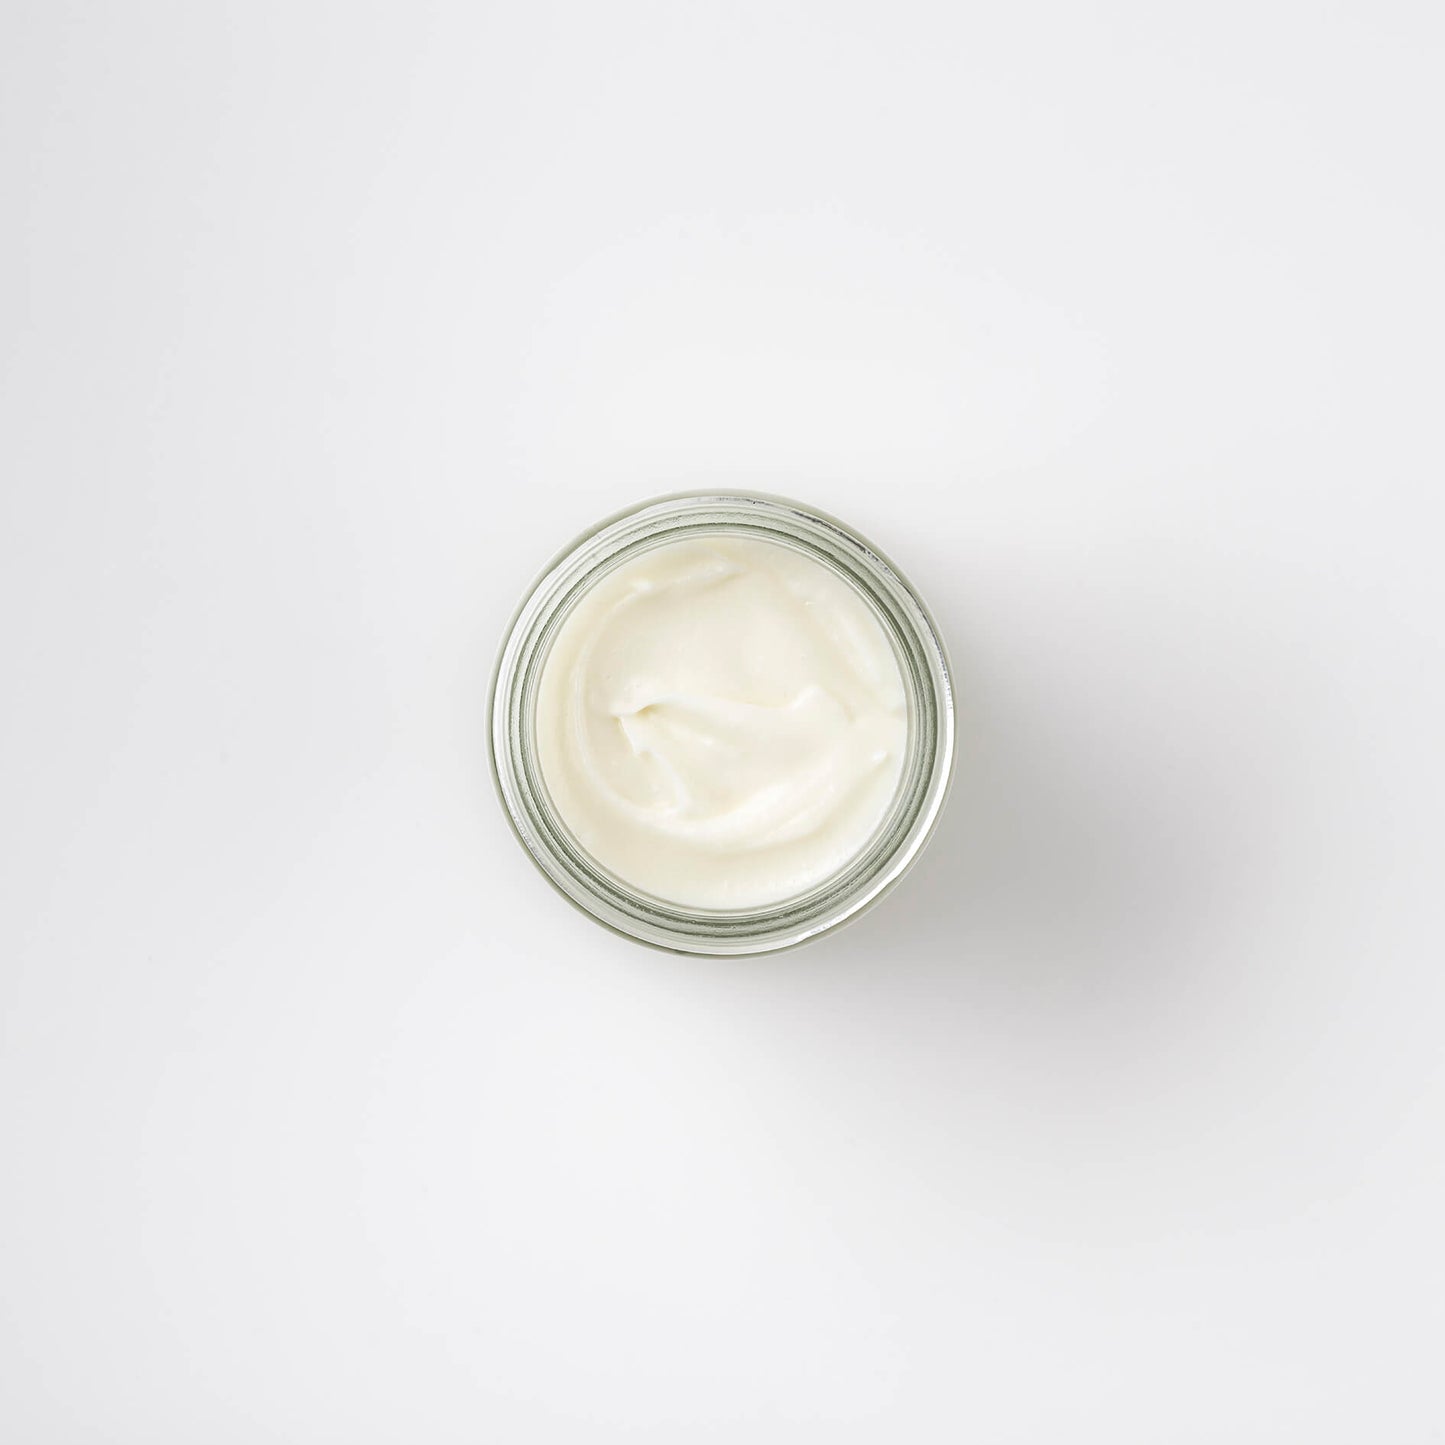 Top view of a 60ml clear glass jar of Bristolmade jasmine face cream, showing the cream's smooth, white surface inside. 